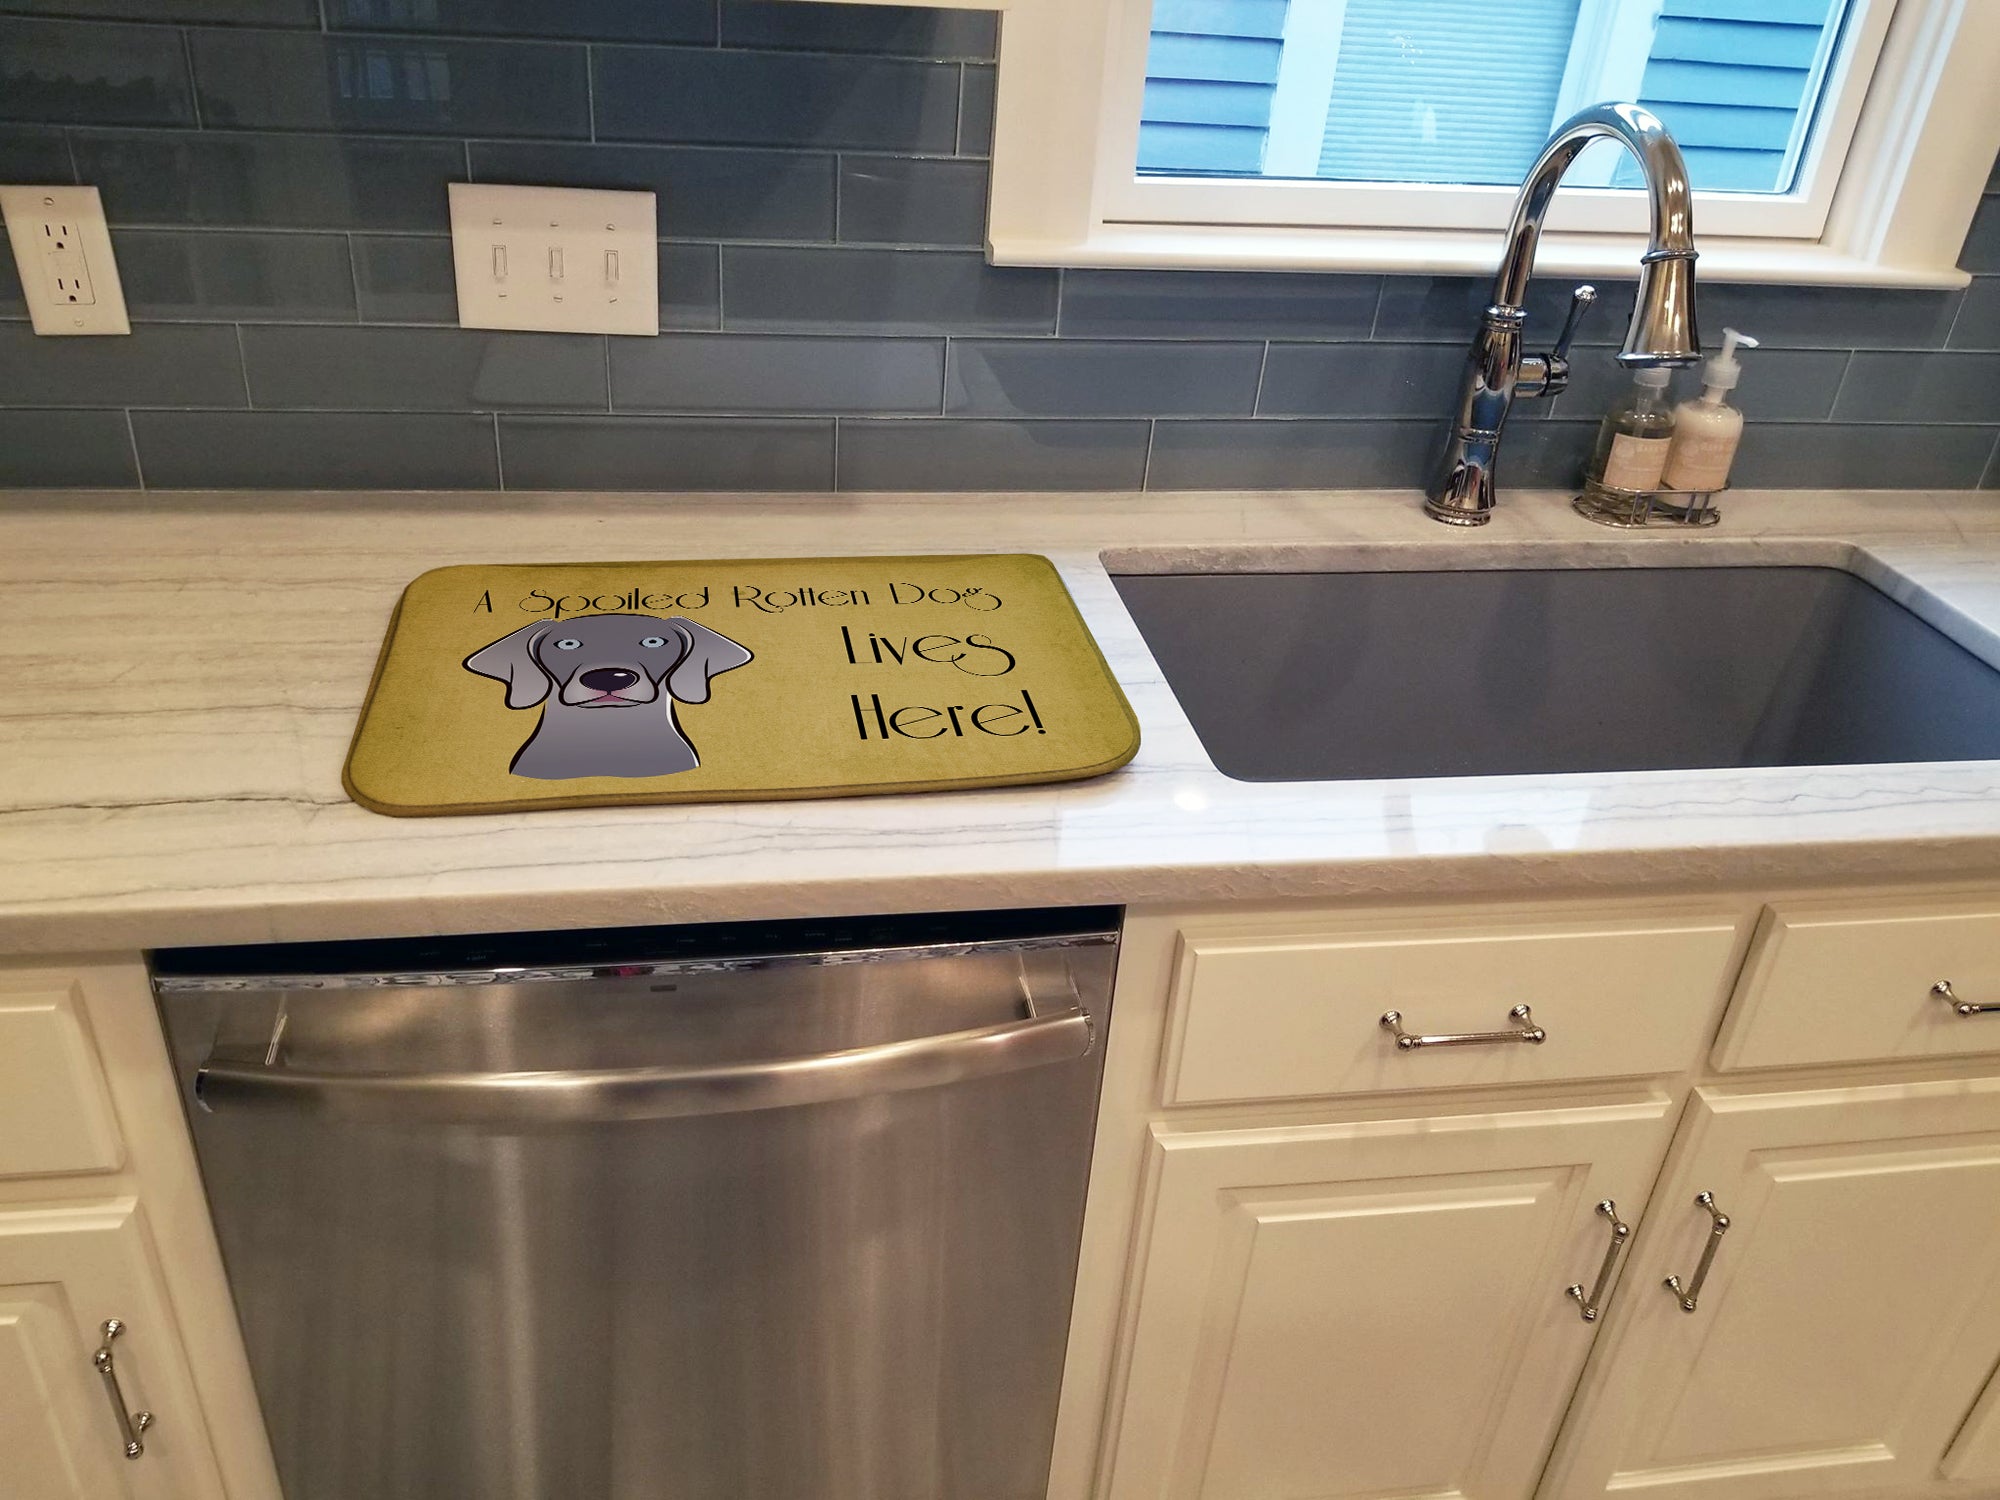 Weimaraner Spoiled Dog Lives Here Dish Drying Mat BB1479DDM  the-store.com.